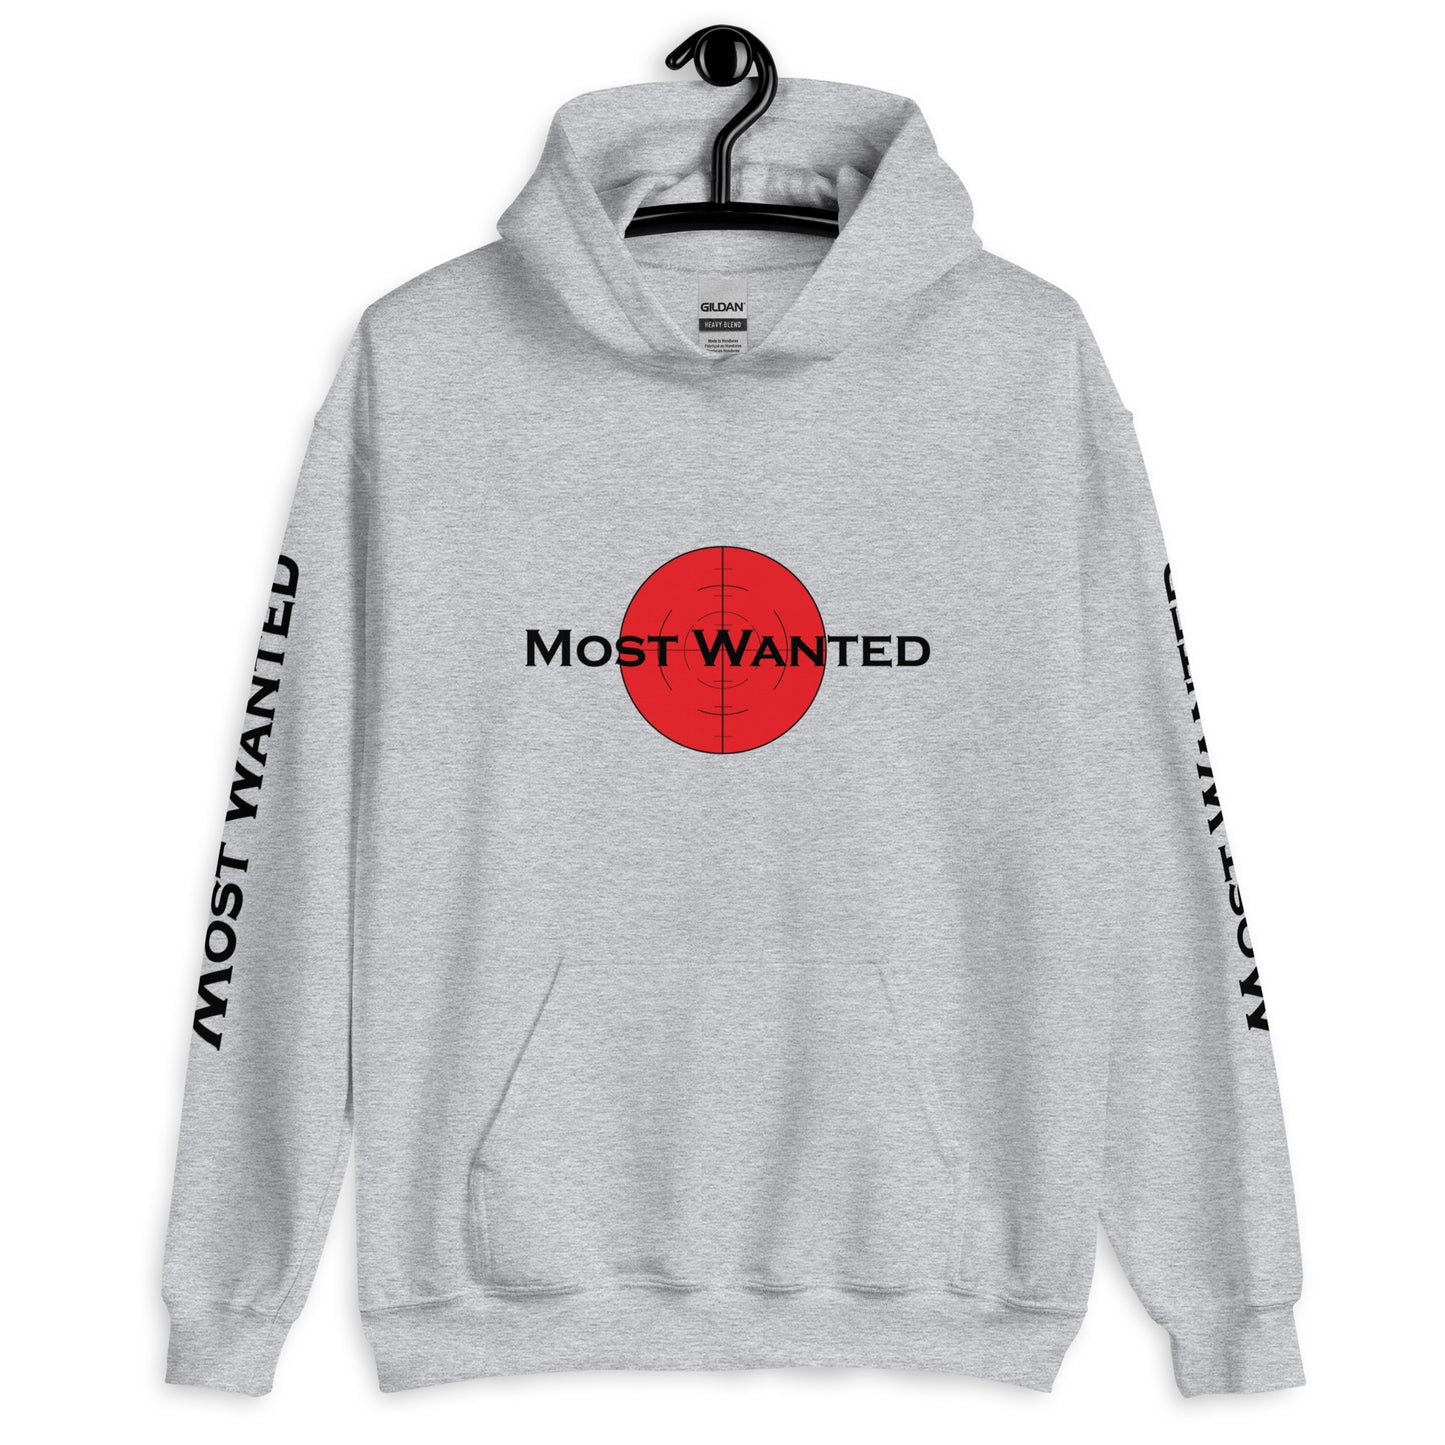 MOST WANTED WHITE OG HOODIE #1 ⭐⭐